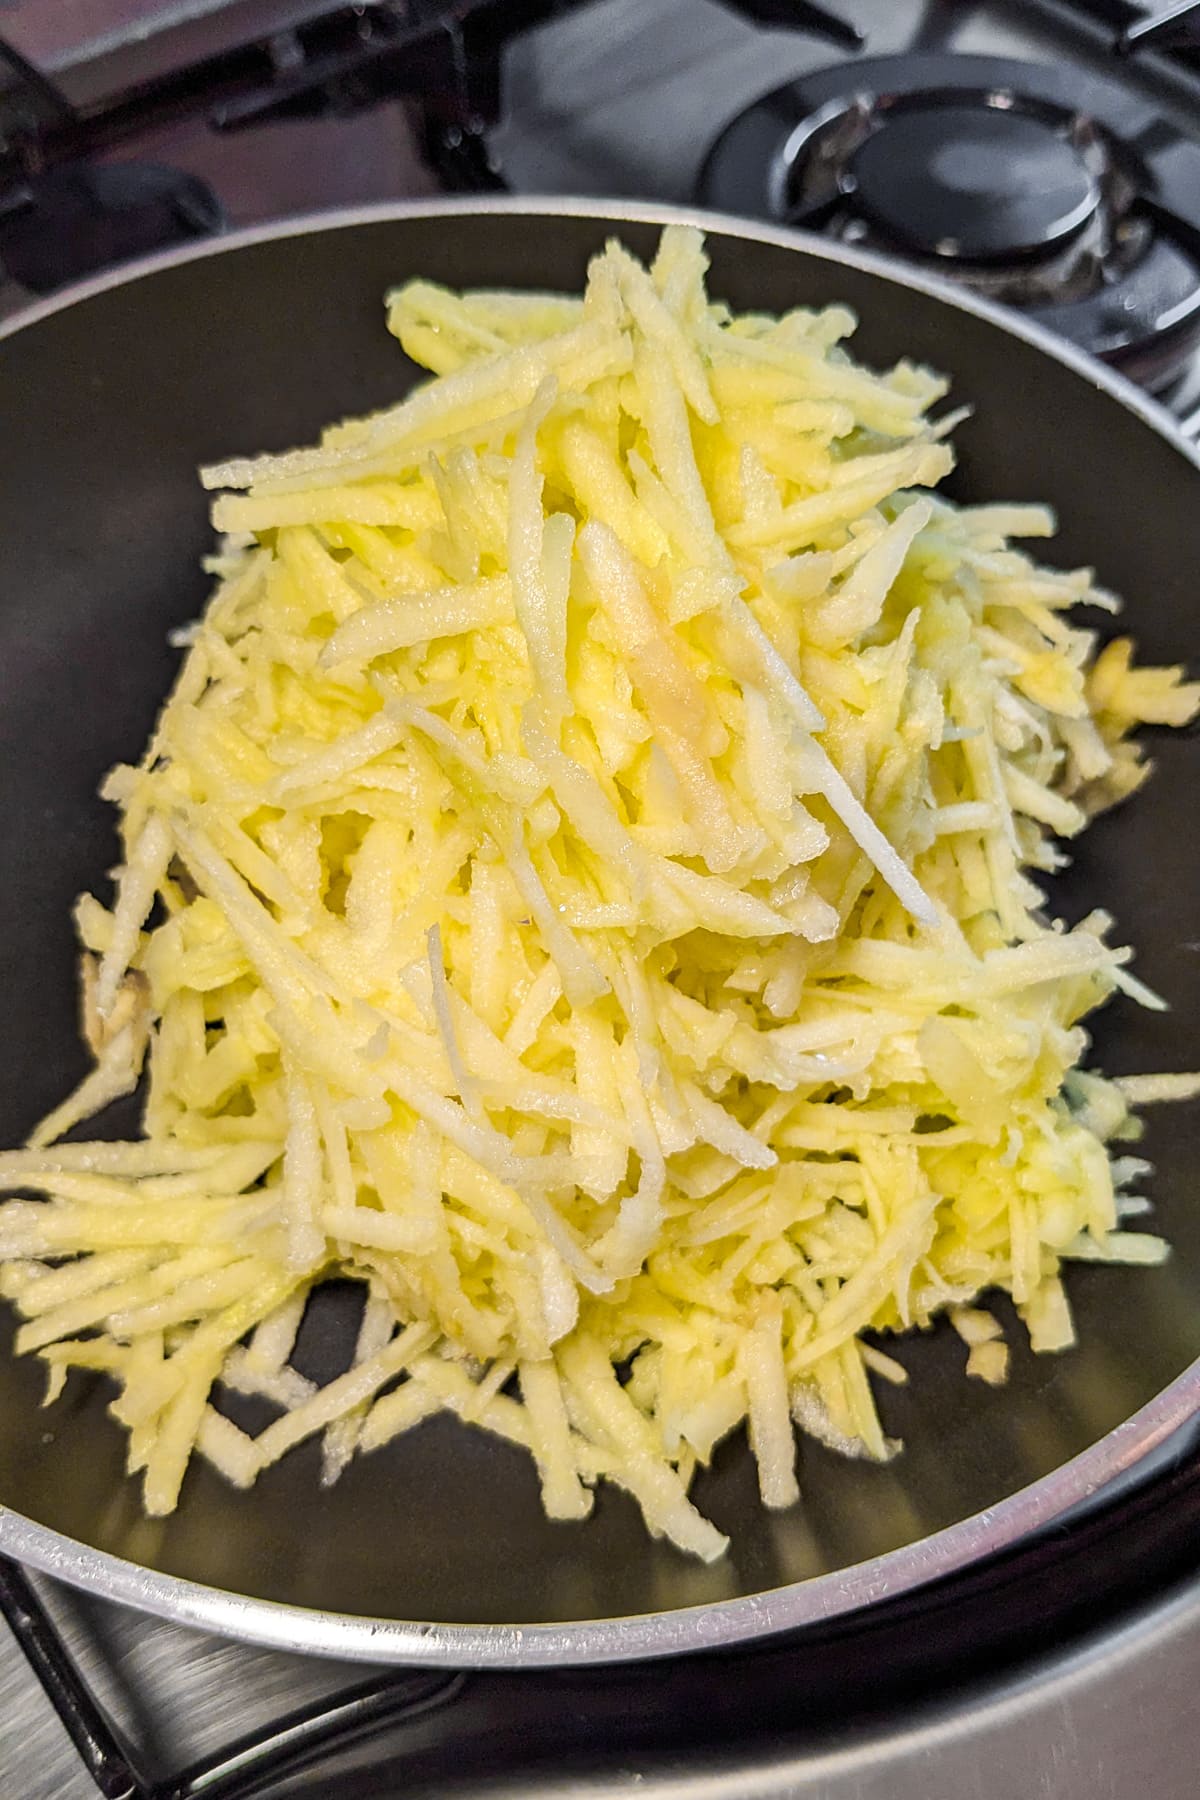 Grated apples in a frying pan on the stove.